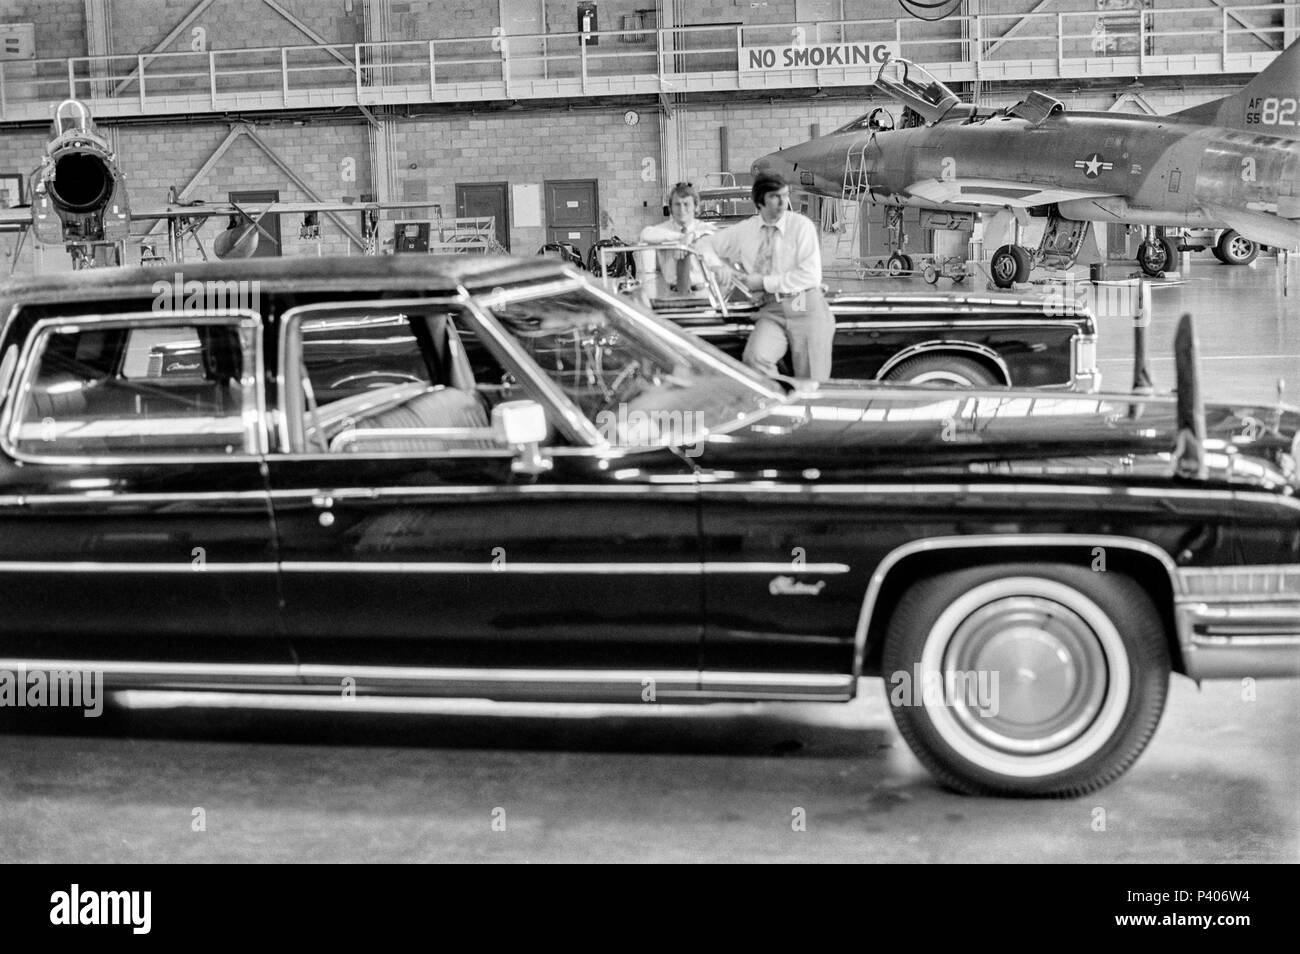 FORT SMITH, AR, USA - AUGUST 10, 1975 -- Two United States Secret Service agents keep watch  over the presidential limo in a secure military aircraft hanger while President Gerald Ford tours the new Vietnamese refugee center at Fort Chaffee, AR.  Focus is on the agents. Stock Photo